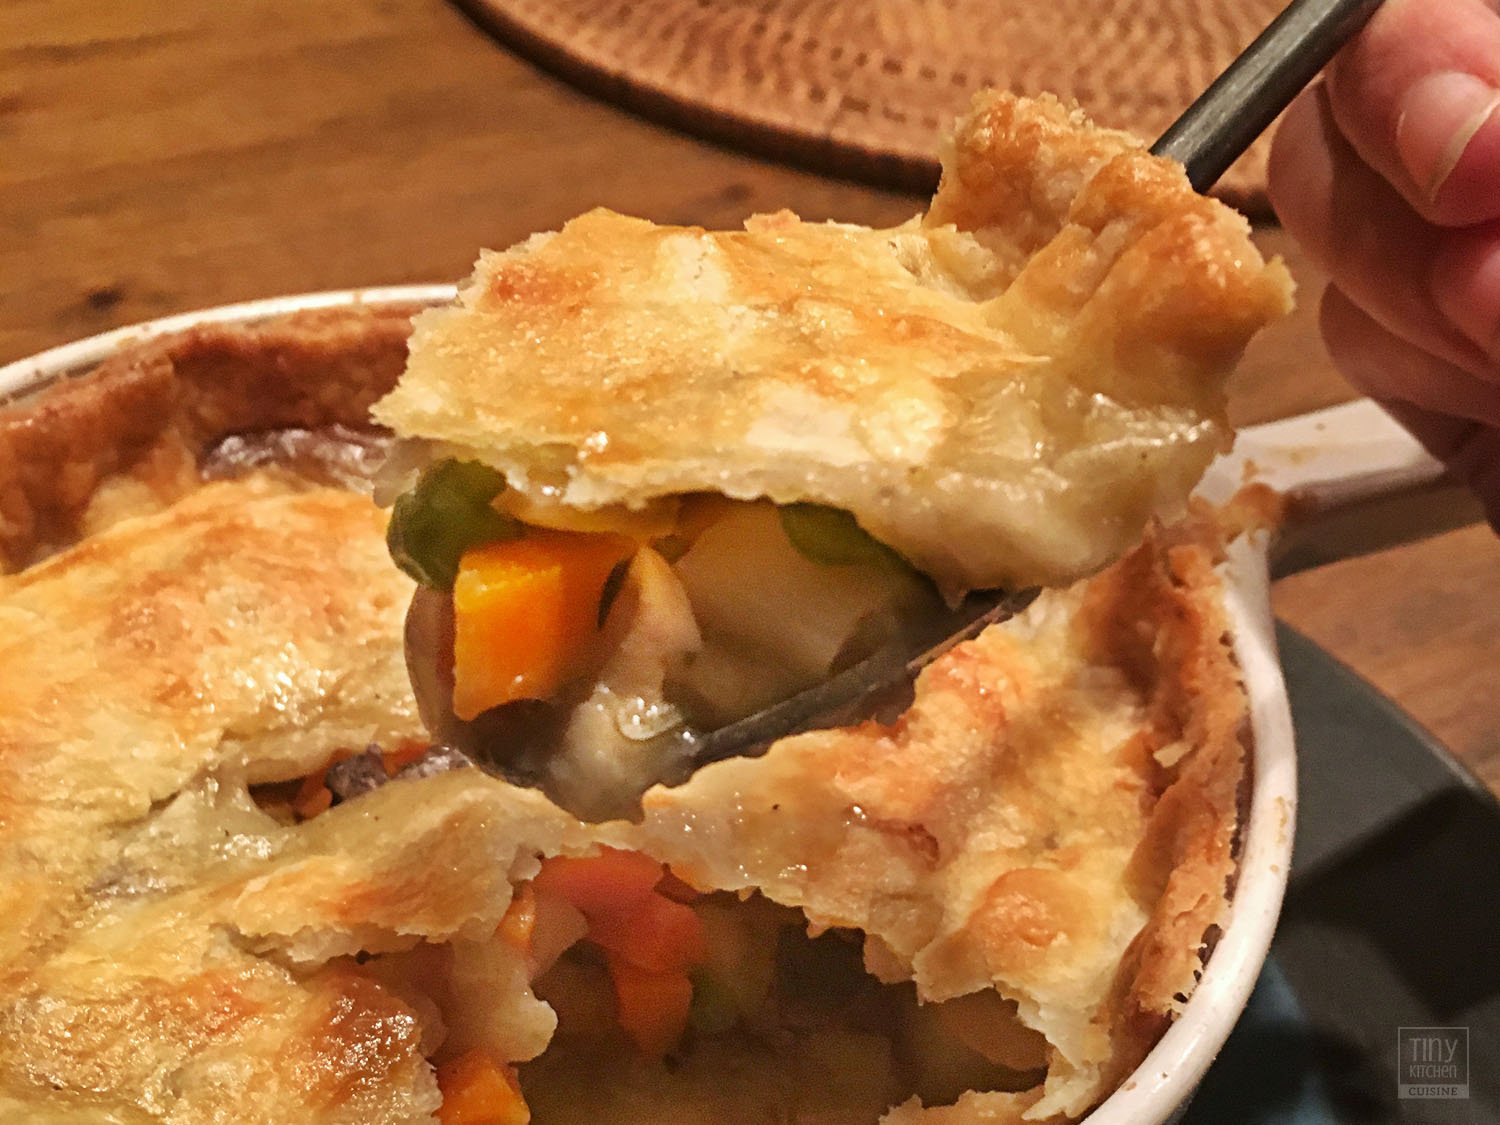 Filled with vegetables and vegetarian gravy, this vegetable pot pie is the ultimate vegetarian comfort food recipe! | Tiny Kitchen Cuisine | http://tiny.kitchen